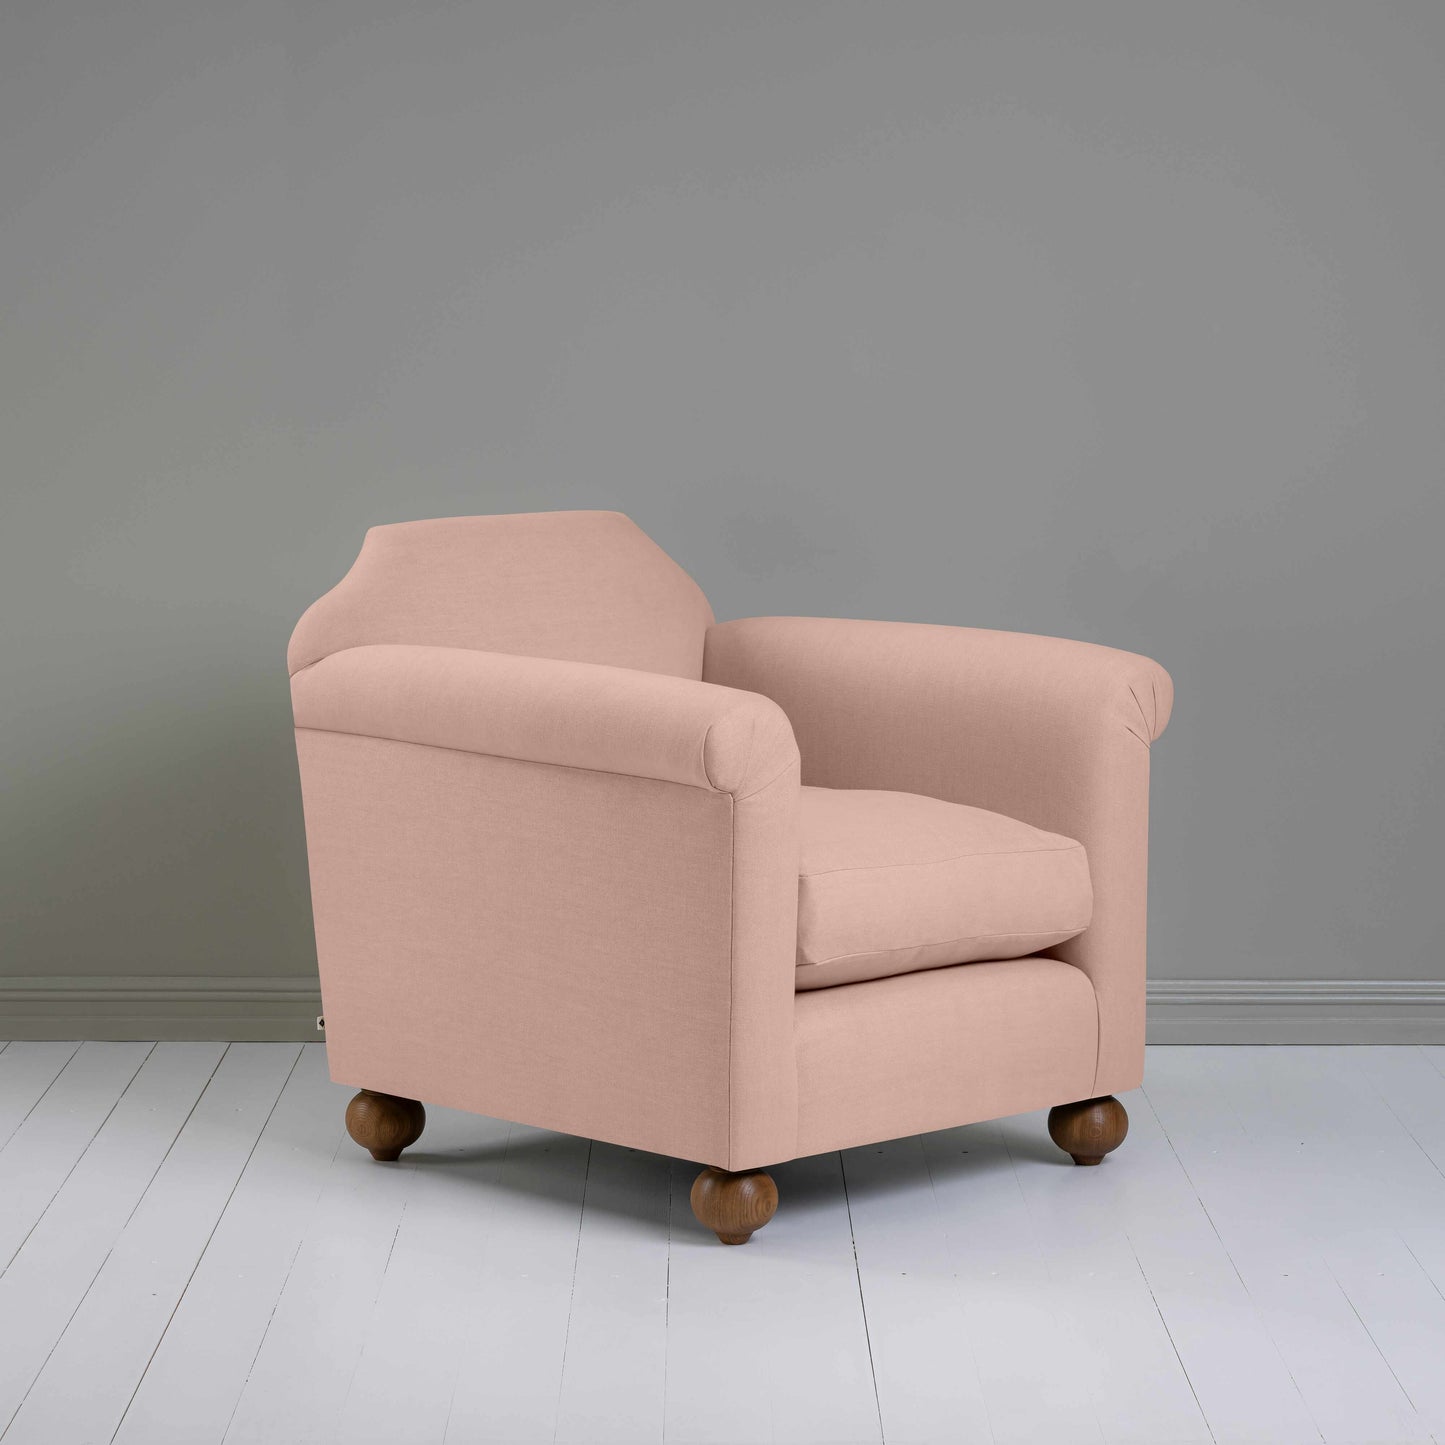 Dolittle Armchair in Laidback Linen Dusky Pink